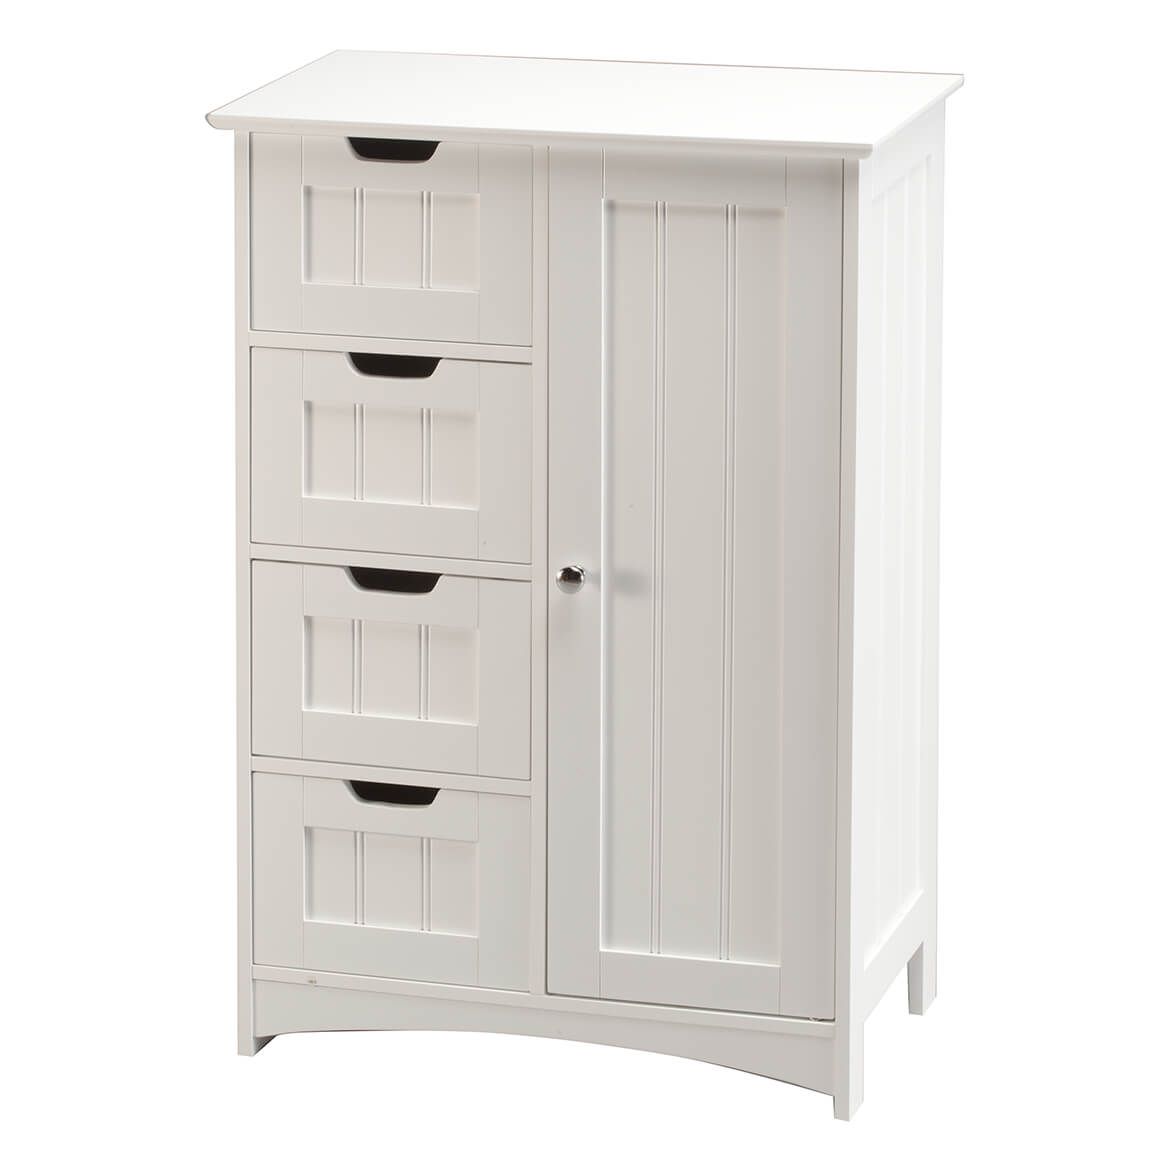 Ambrose Collection Bathroom Cabinet by OakRidge™ + '-' + 361901